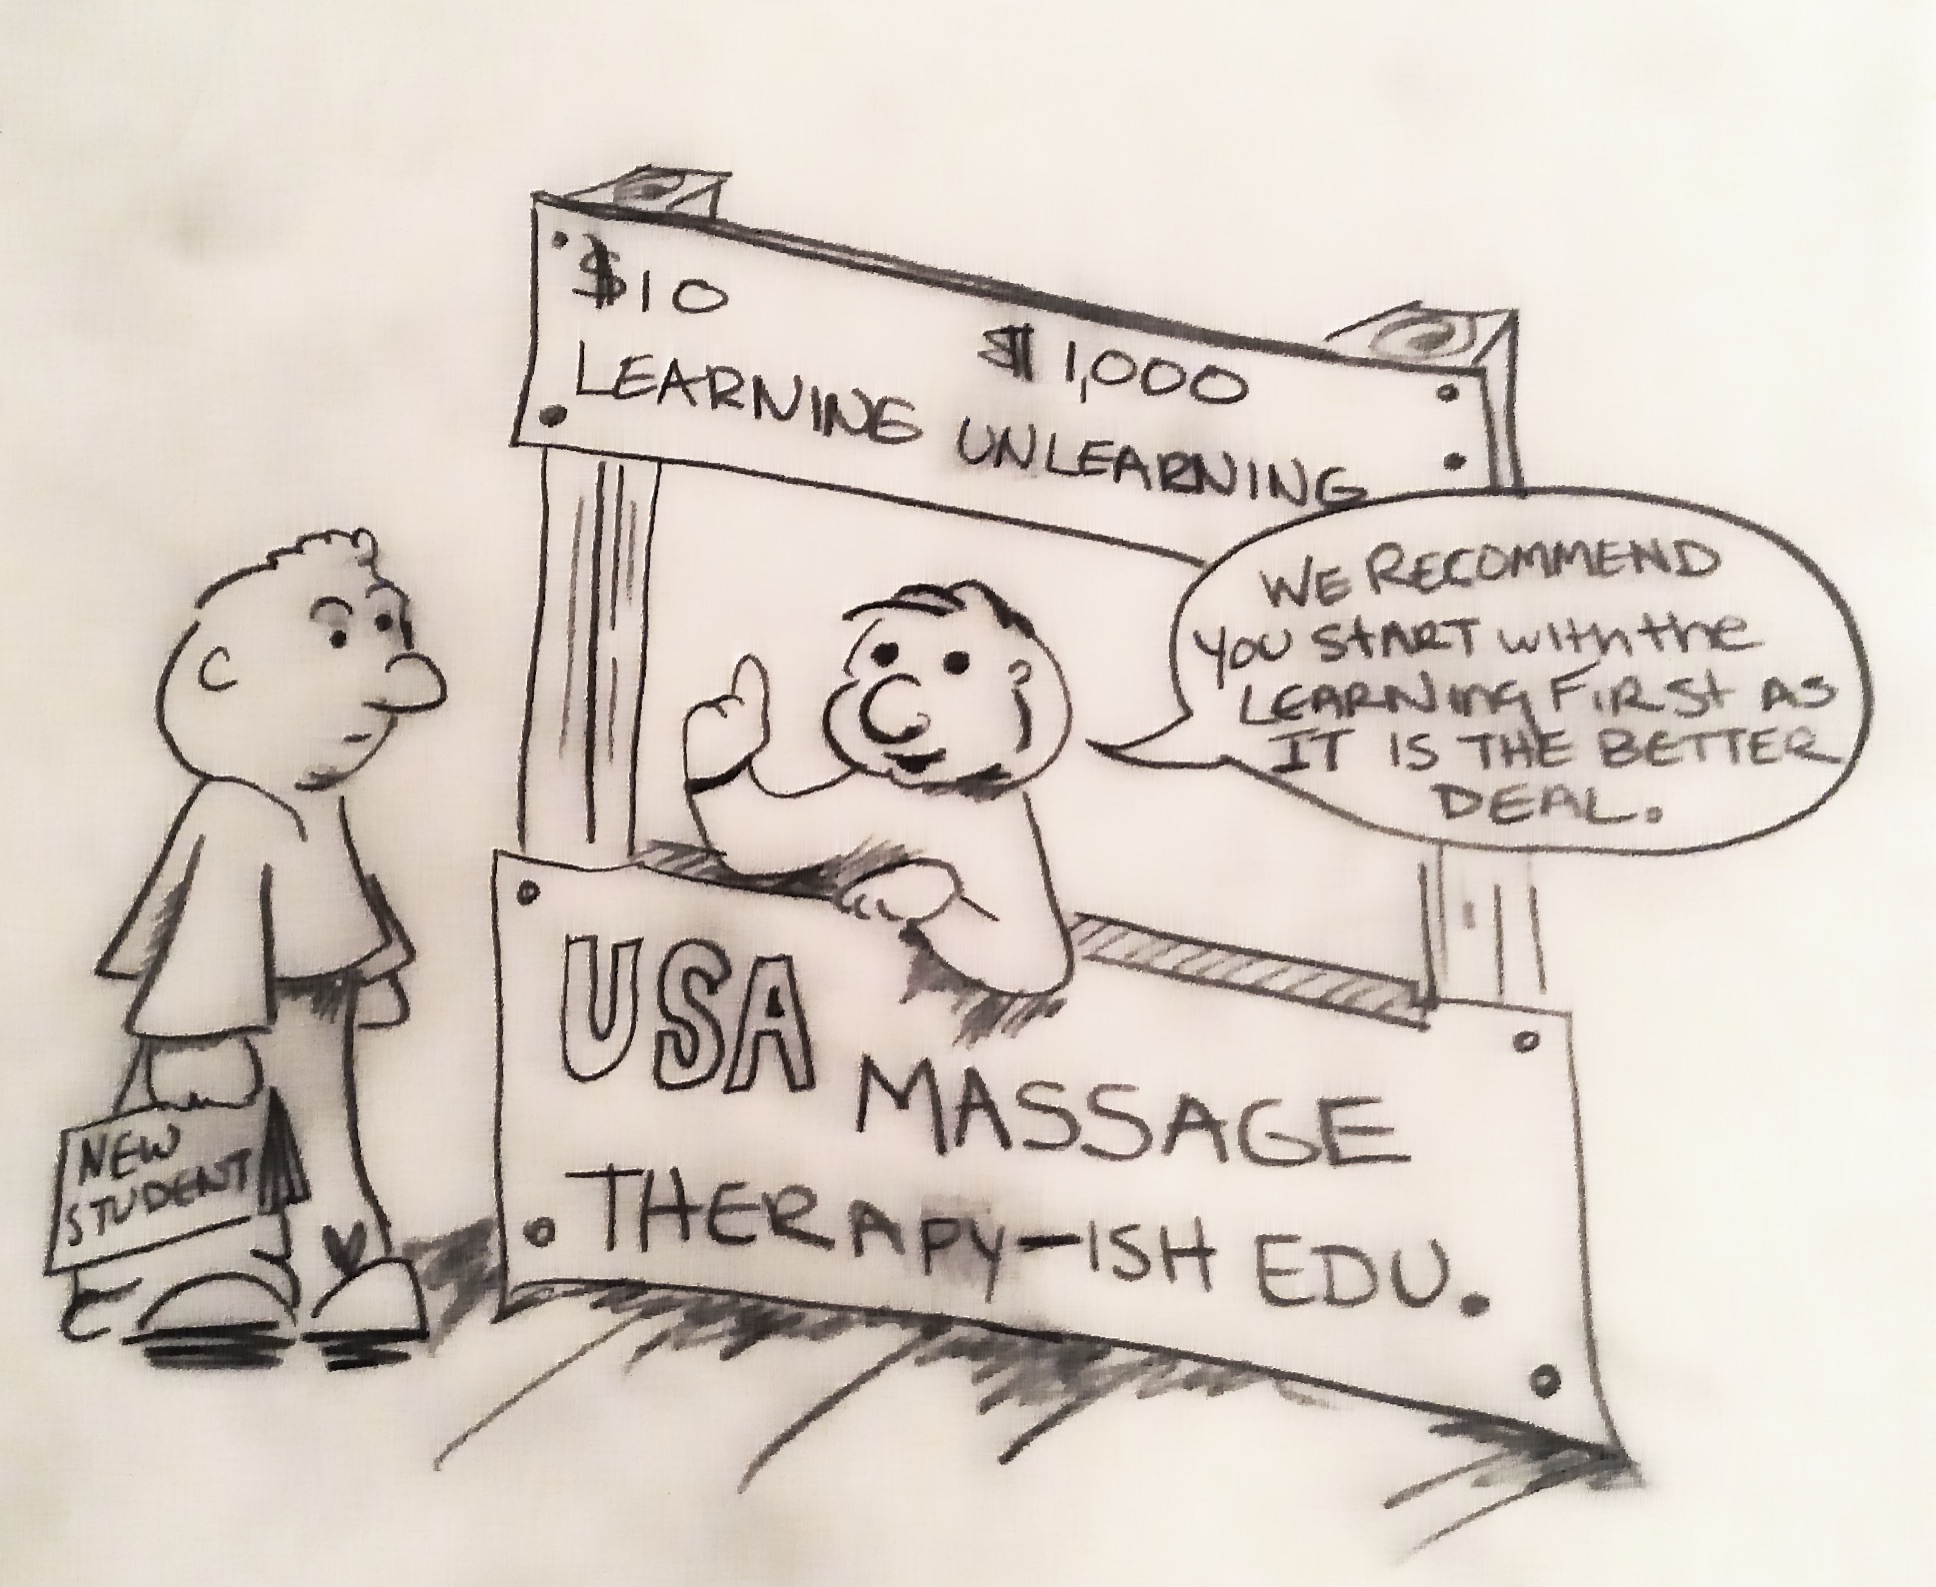 What is the price of a massage therapy education?